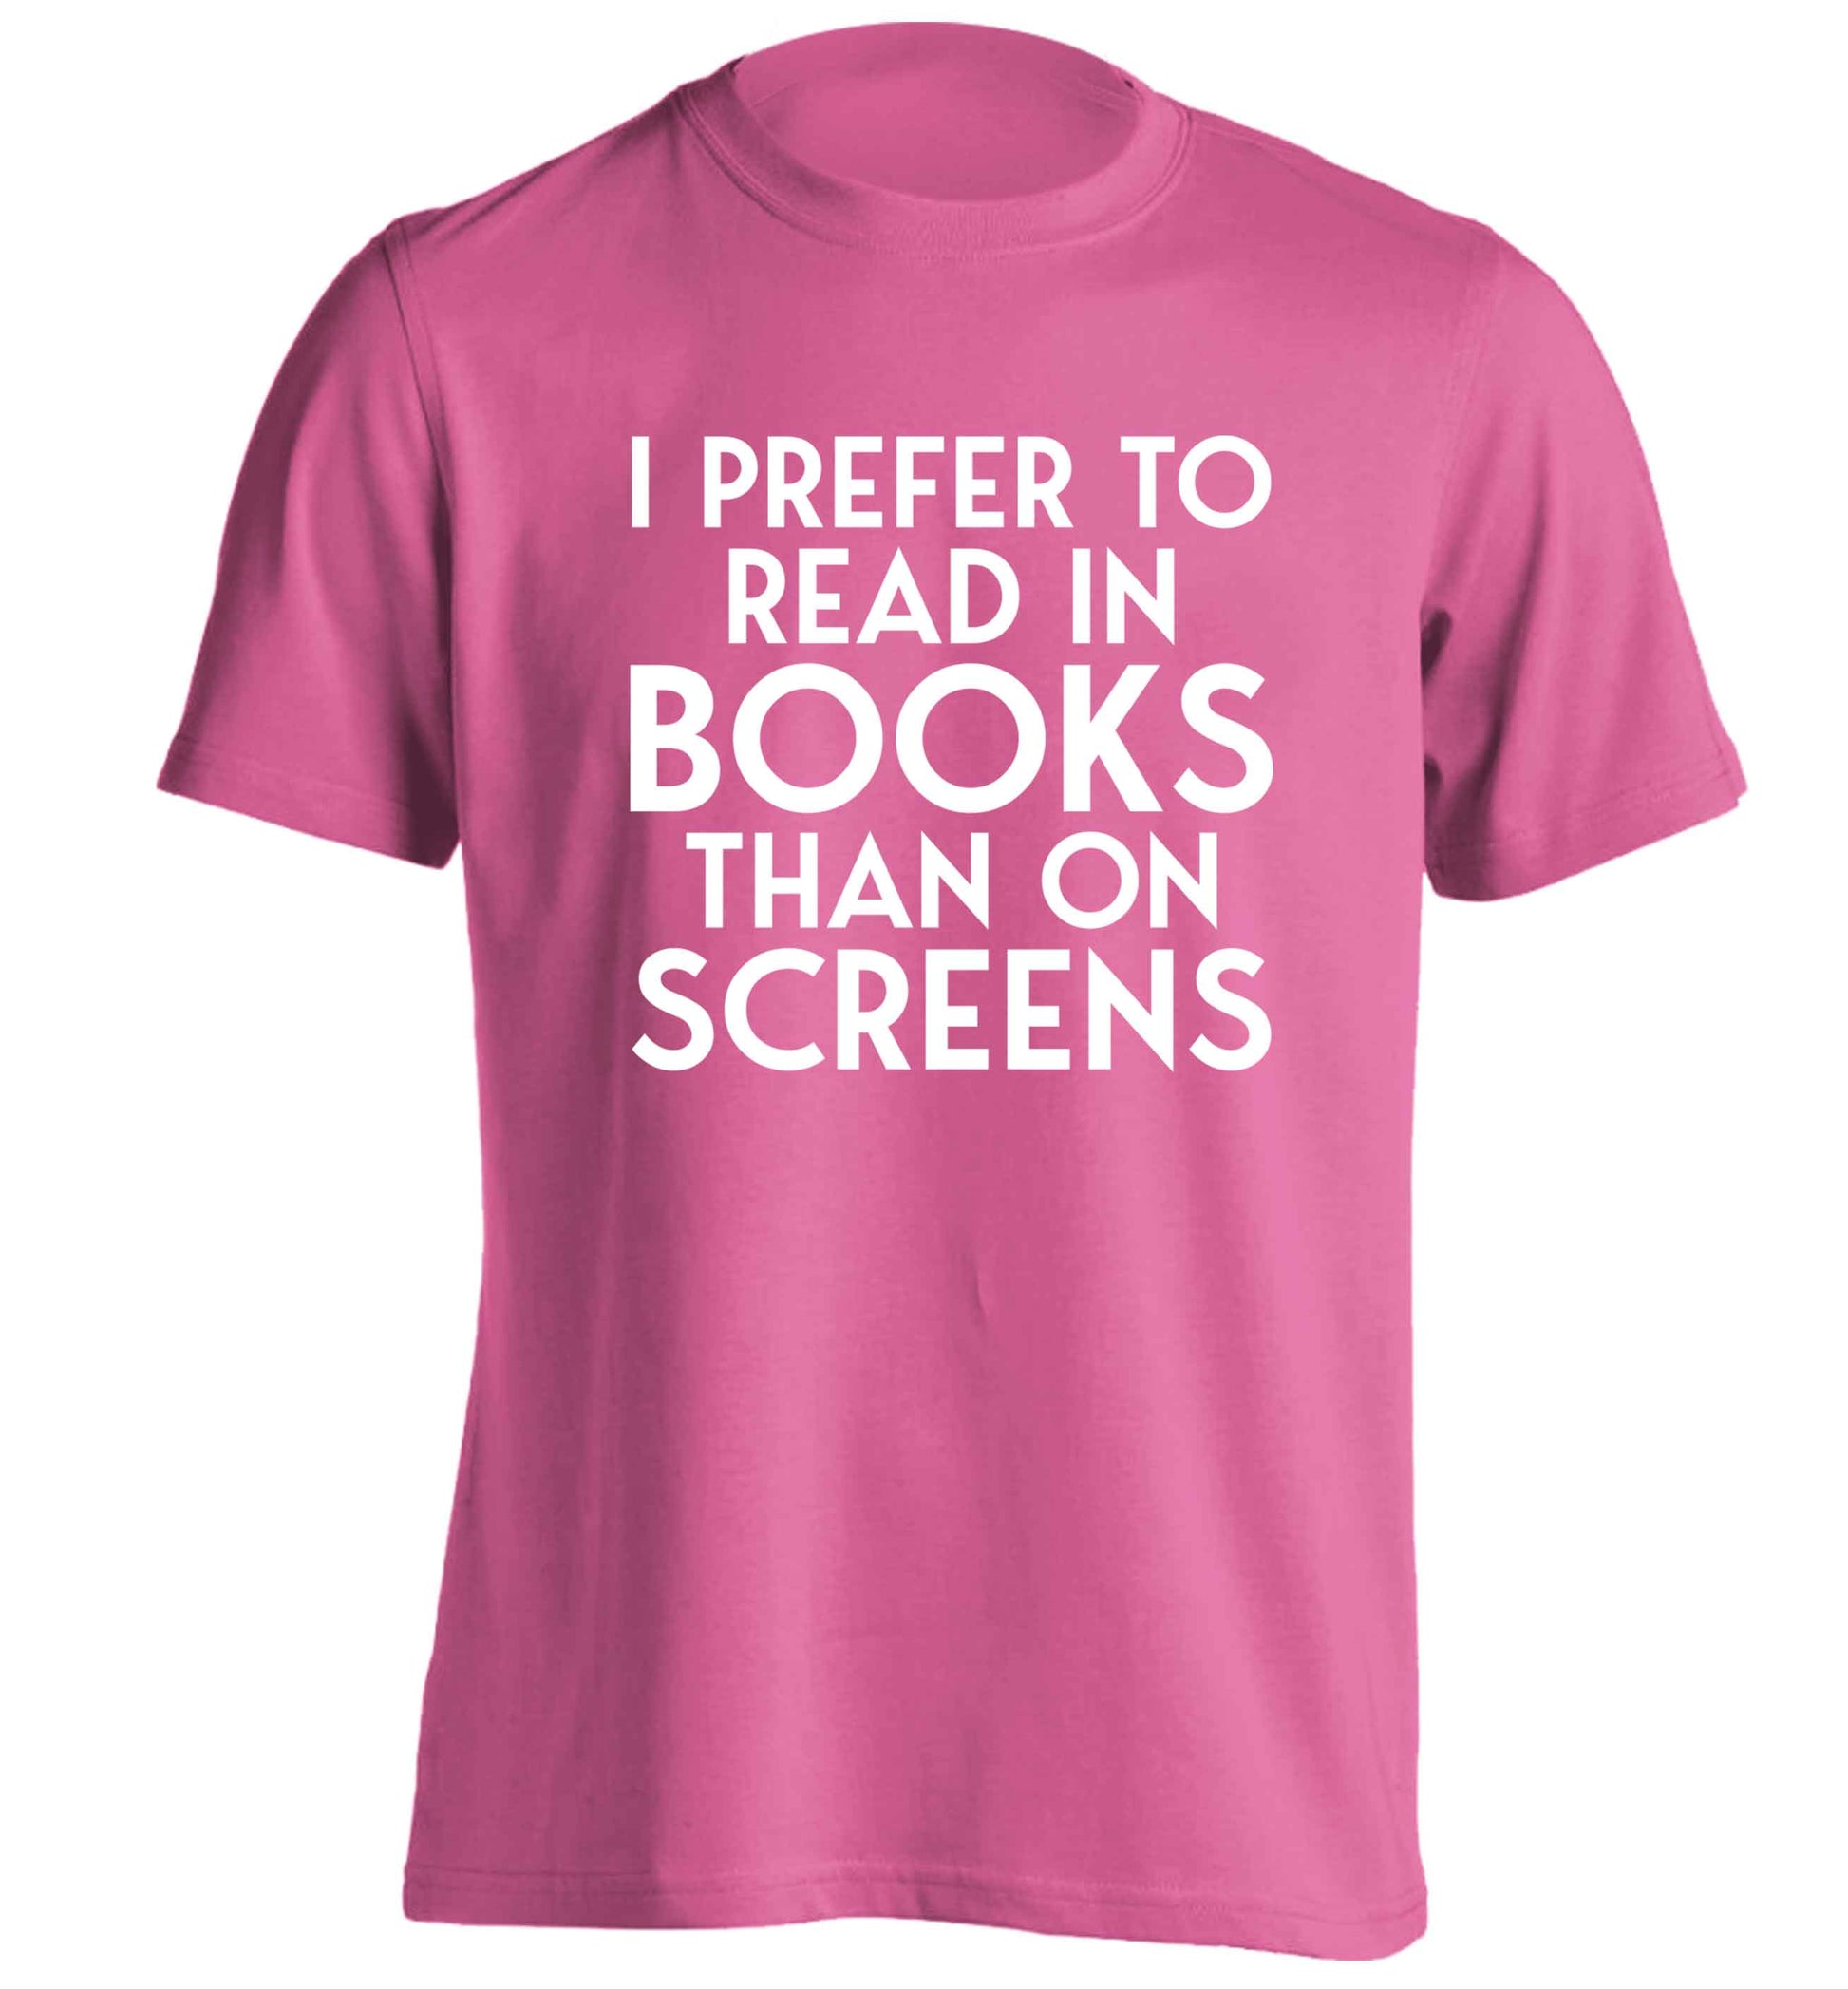 I prefer to read in books than on screens adults unisex pink Tshirt 2XL